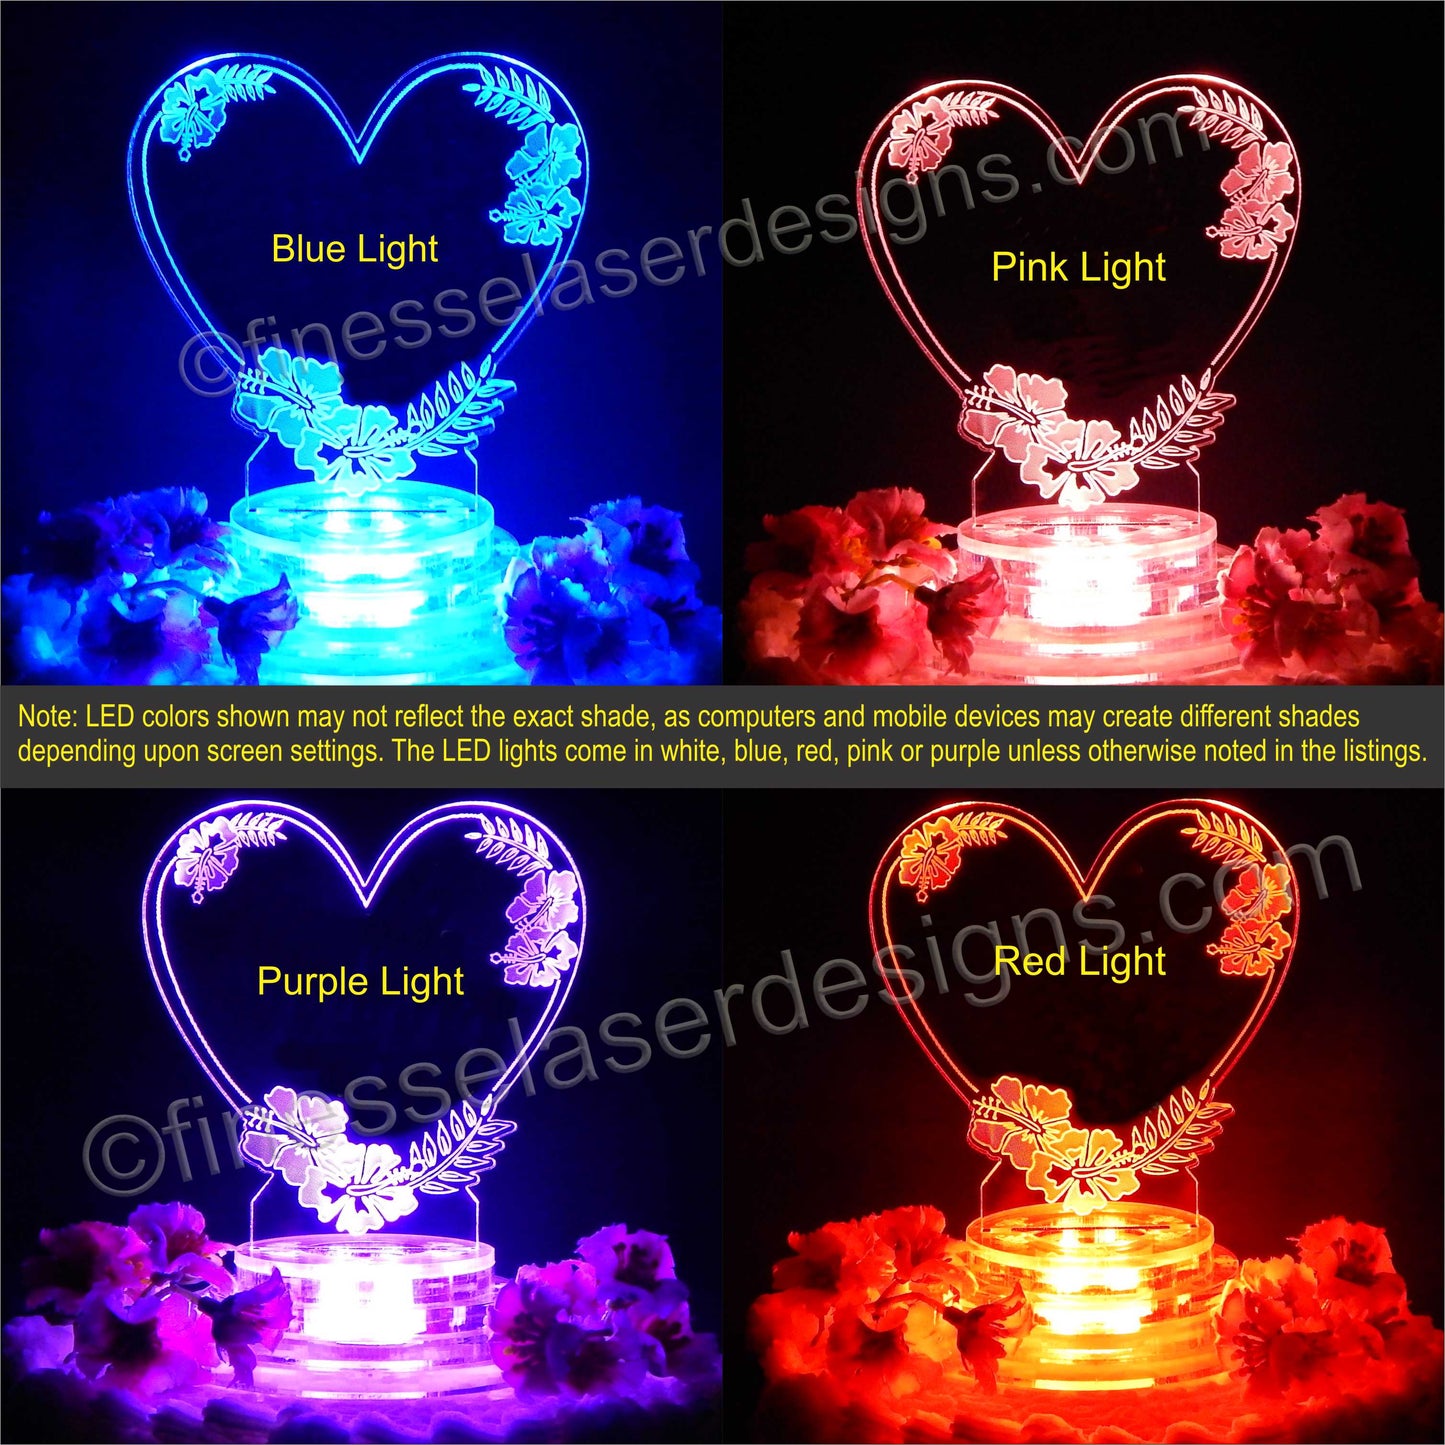 lighted color view of a heart shaped cake topper designed with an hibiscus flower design, shown in blue, pink, purple and red lighting